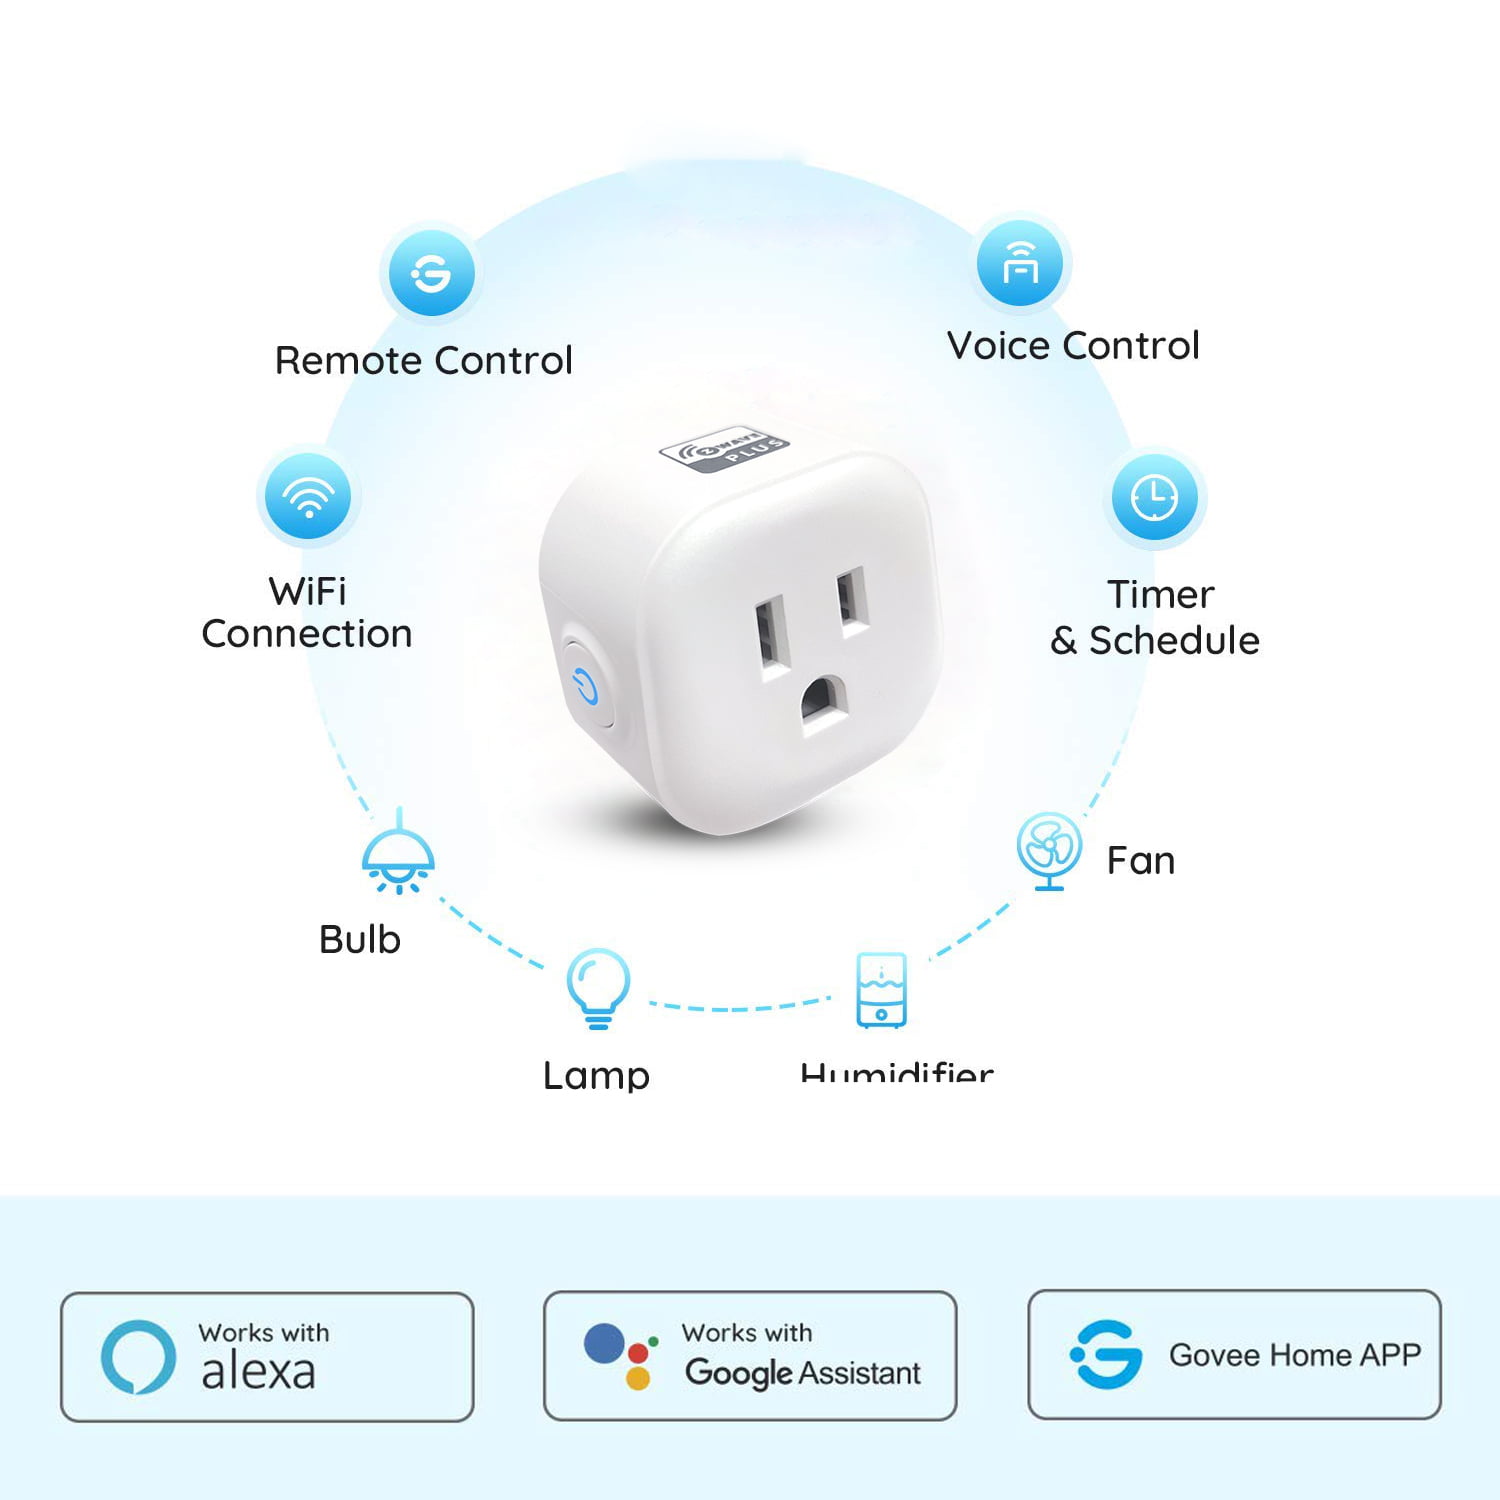 Minoston Z-Wave Smart Plug 700 Series Work with SmartThings, Homeseer,  Vera, Wink, Alexa, Google Assistant, Z-Wave Hub Required, FCC ETL Listed -  Yahoo Shopping